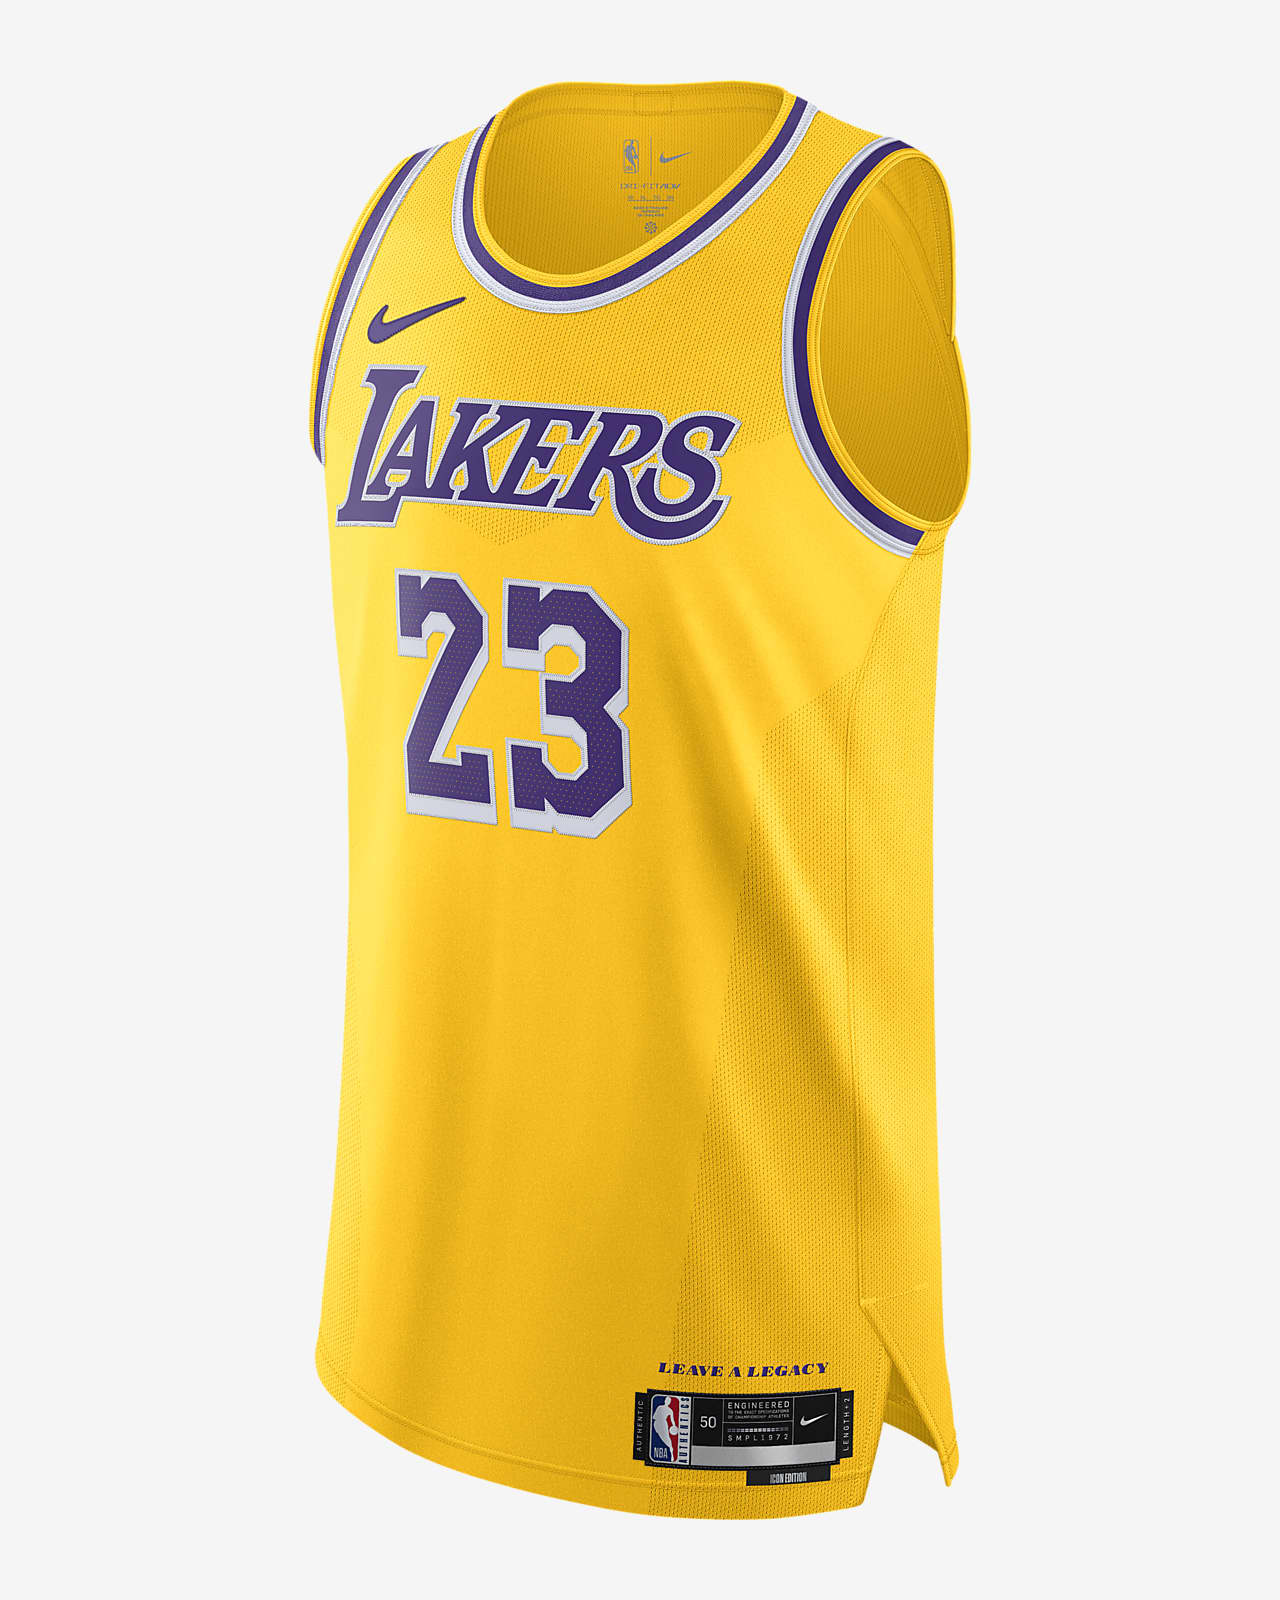 https://static.nike.com/a/images/t_PDP_1280_v1/f_auto,q_auto:eco/f6eda9fc-f965-43d9-a9c1-3c8d06c304b9/los-angeles-lakers-icon-edition-2022-23-mens-dri-fit-adv-nba-authentic-jersey-5BLJfr.png